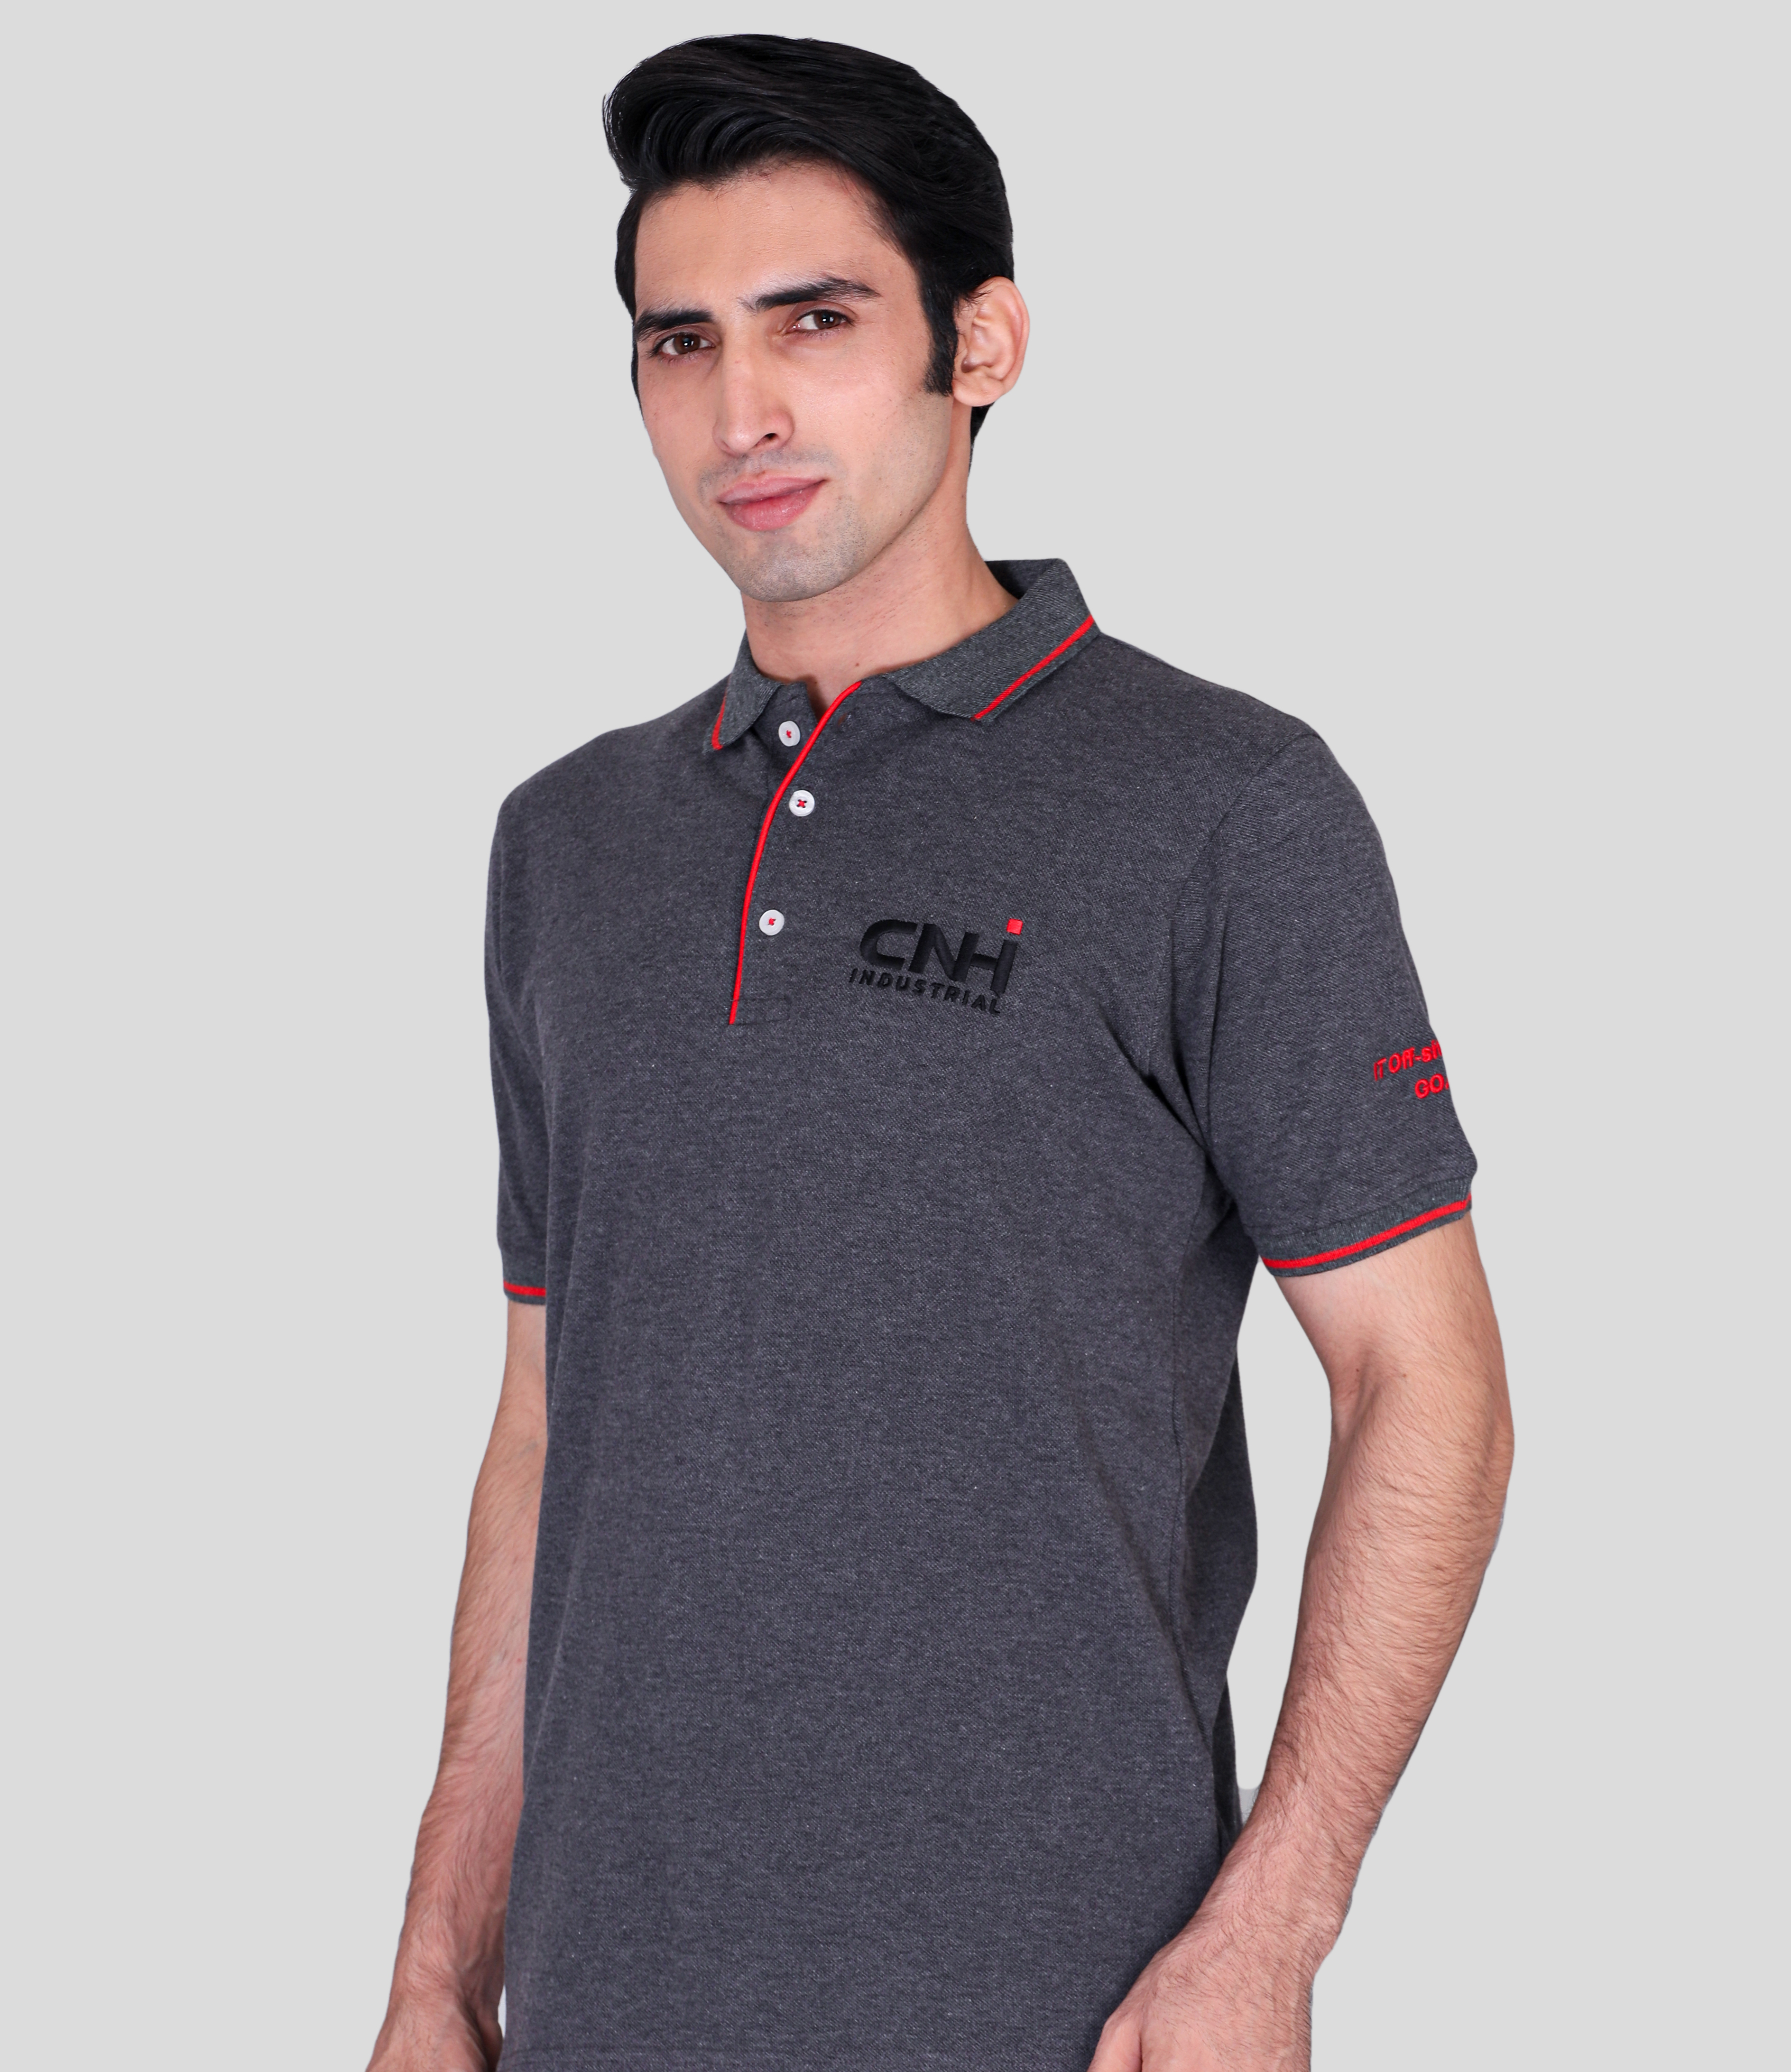 Cnh grey promotional polo t-shirts supplier 